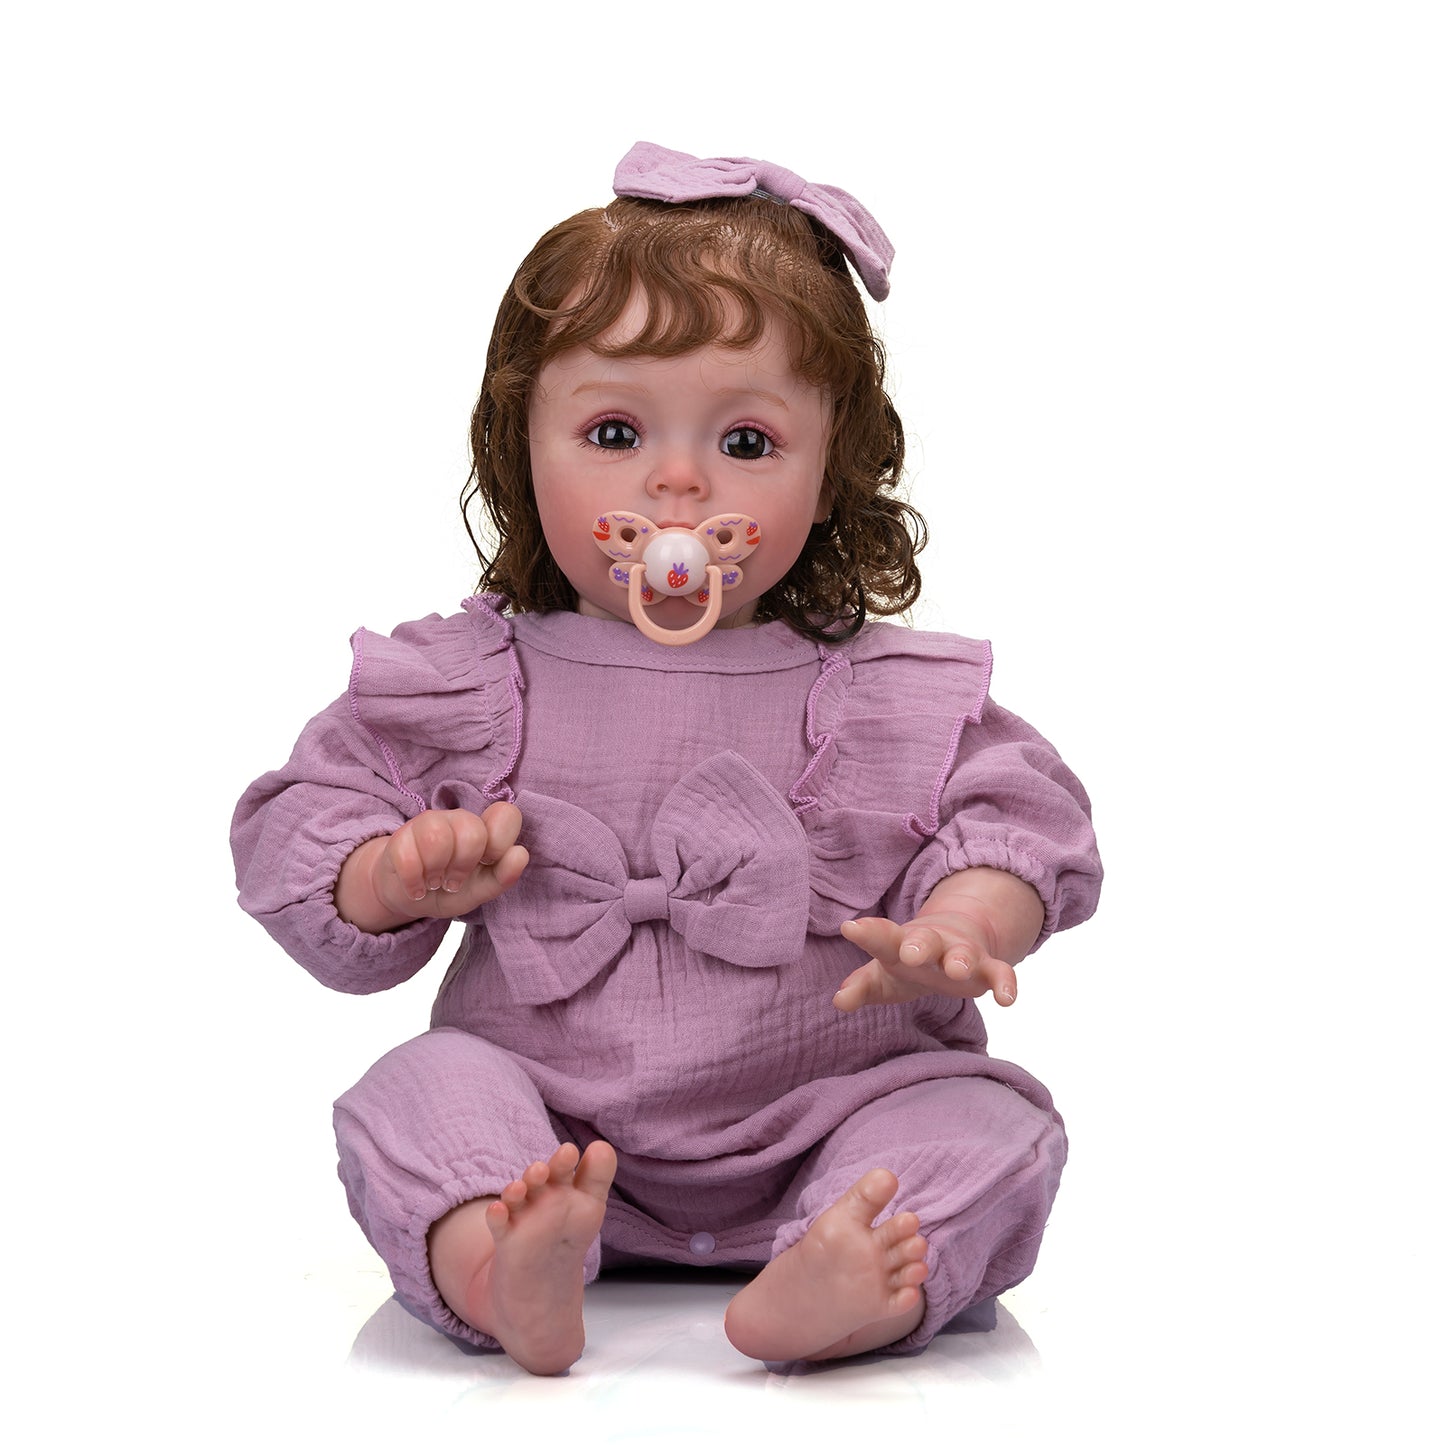 60 cm Lifelike baby dolls | reborn baby dolls | Realistic baby dolls| newborn baby dolls | real life baby dolls | rebron baby dolls toddler | lifelike toddler dolls | therapy dolls for adults | anatomically correct baby girl doll | infant baby doll | gift for kids ages 3+ girl | dementia patients | weighted cloth body | birthday gift | collection | girl | boys |  mother | daughter | granddaughter | sleeping |real look real baby dolls that look real looking | Mothers day | reborn toddler dolls | mnmj